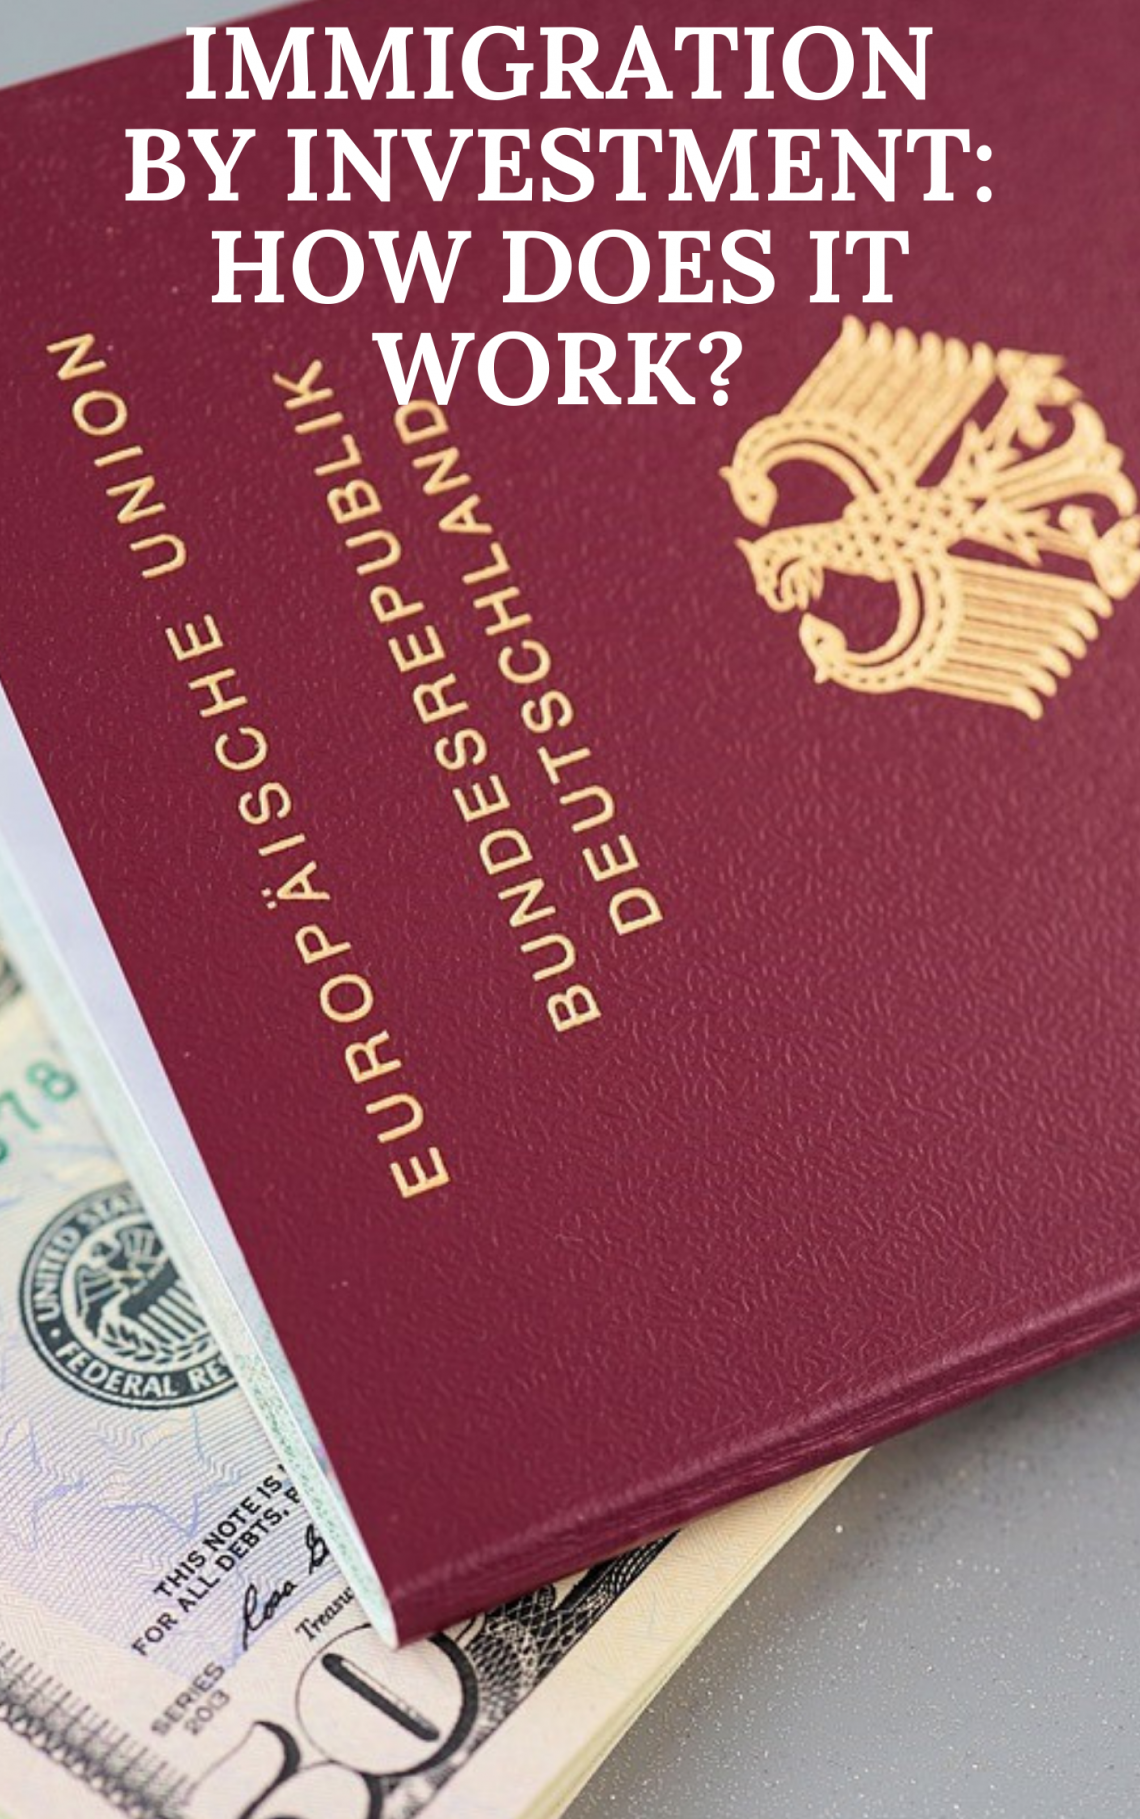 Immigration by Investment: How Does it Work?